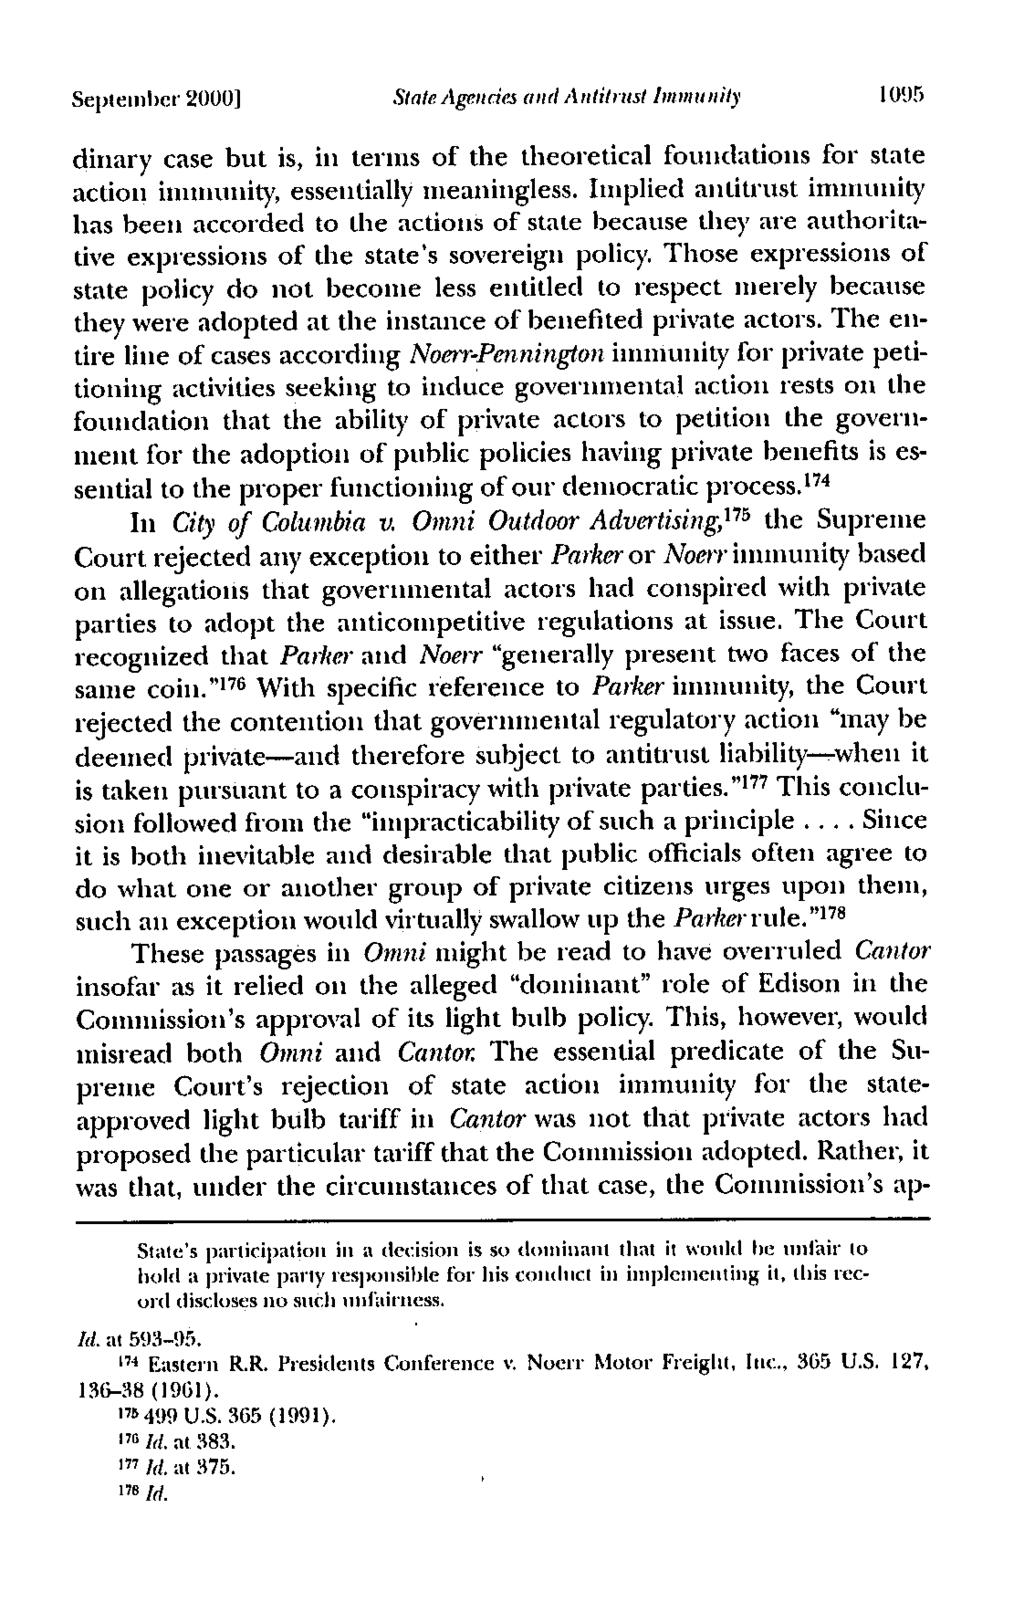 September 2000] State Agenrie3 and Antitrust immu nity1095 Binary case but is, in terms of the theoretical foundations for state action immunity, essentially meaningless.